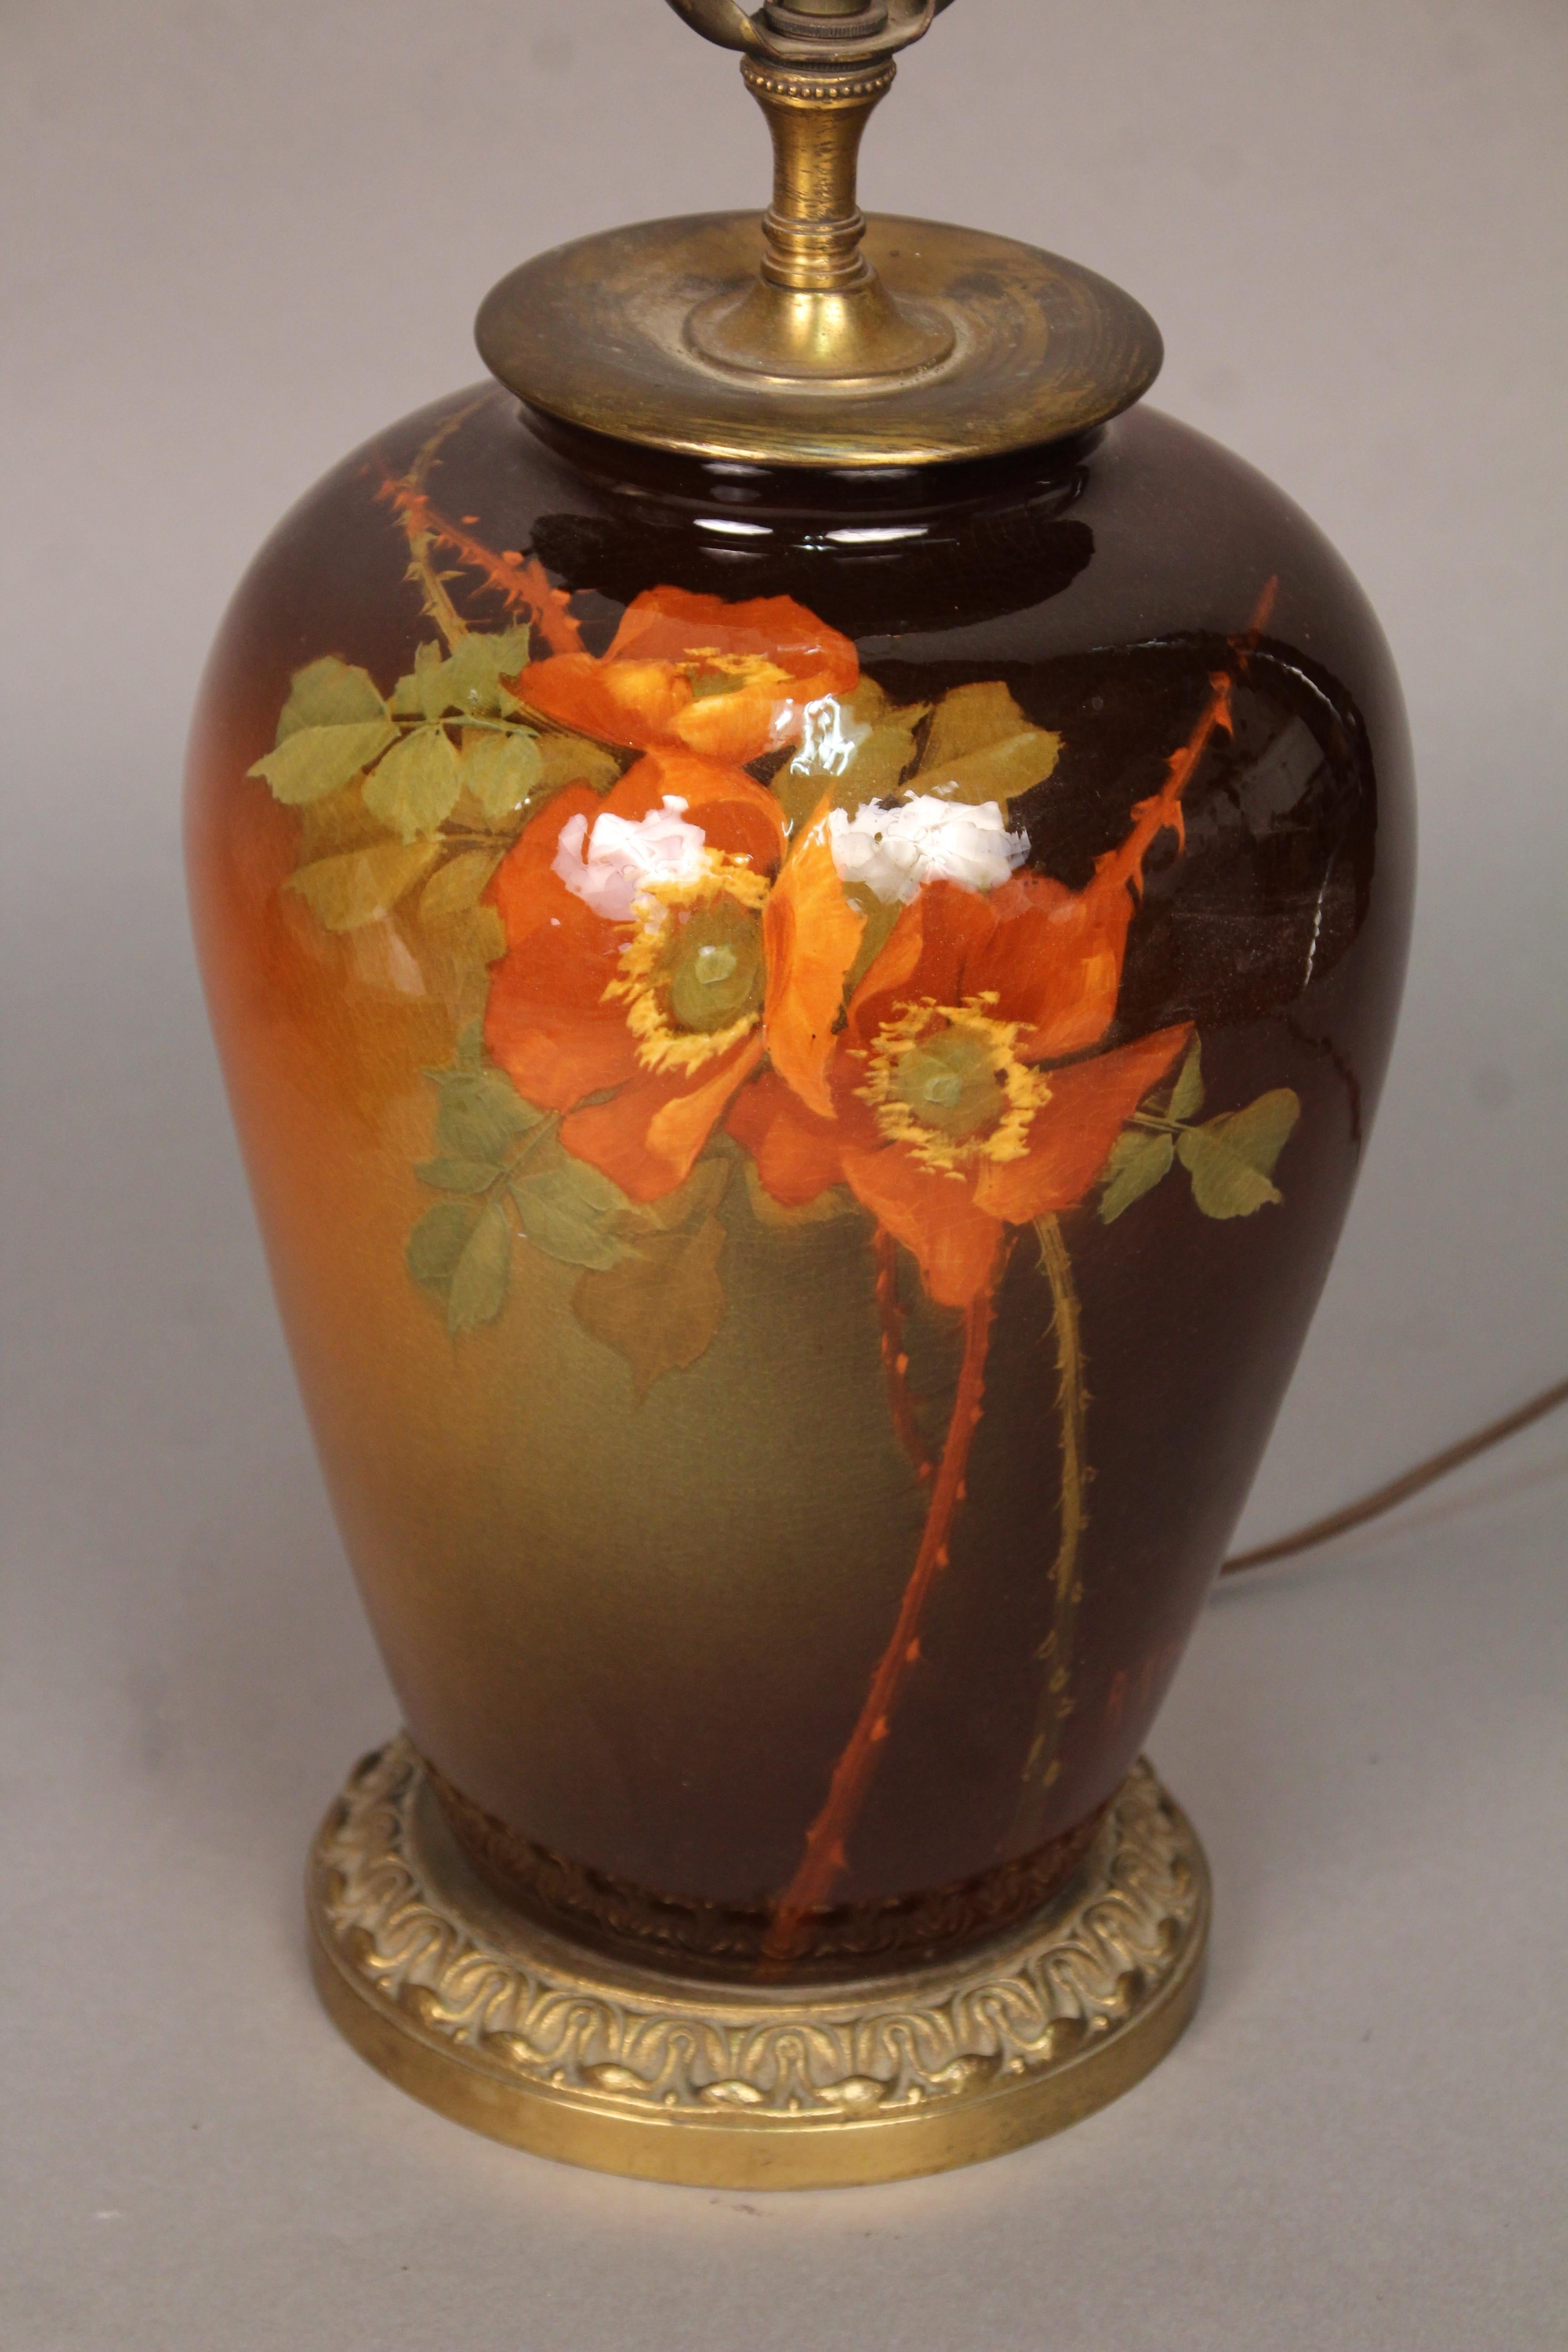 North American Signed Weller Arts & Crafts Lamp with Hand-Painted Poppies by Albert Haubrich